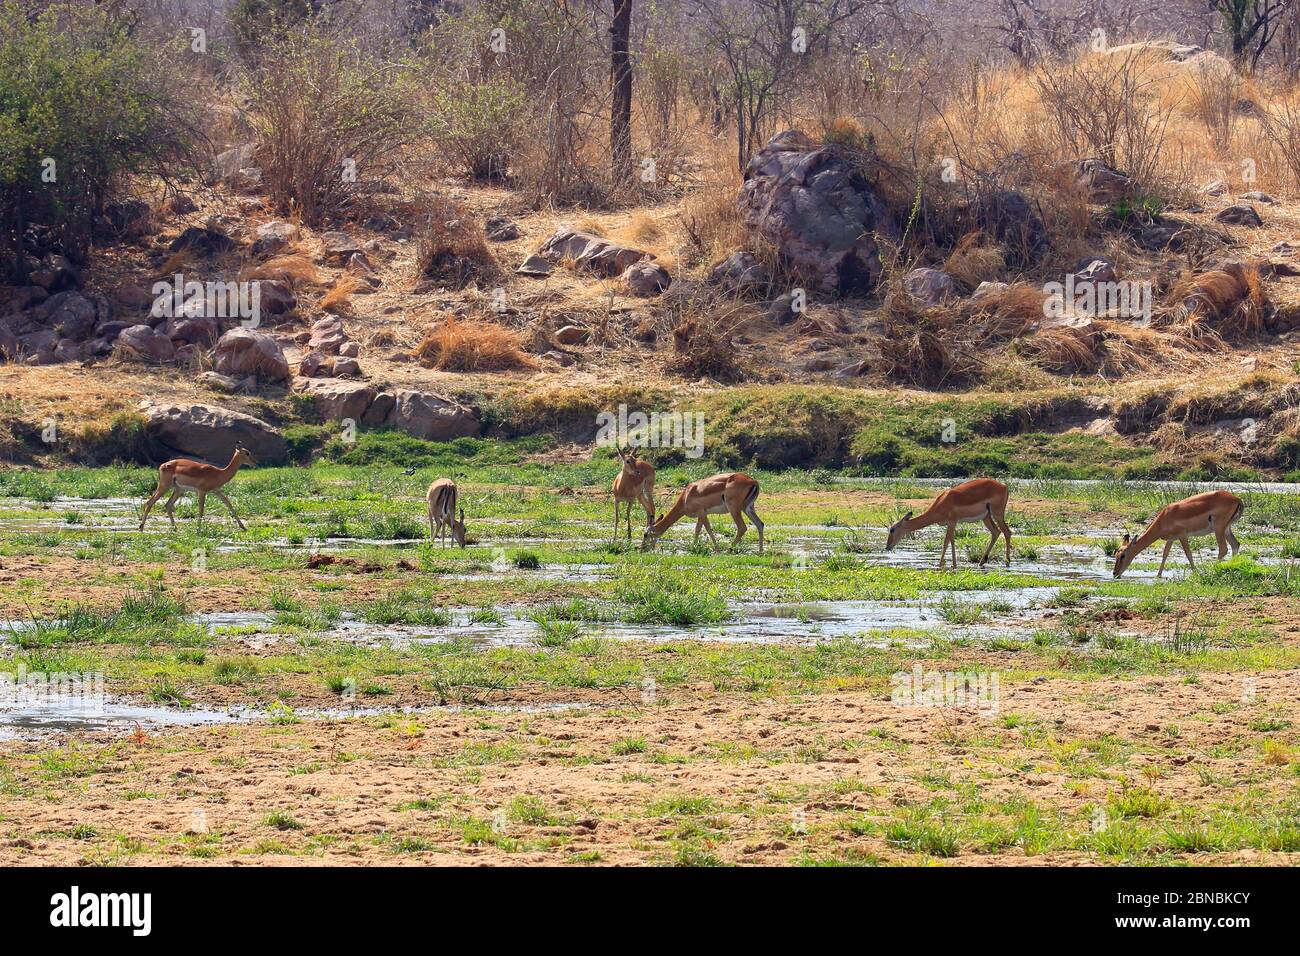 A small herd of impala drinking in a riverbed Stock Photo